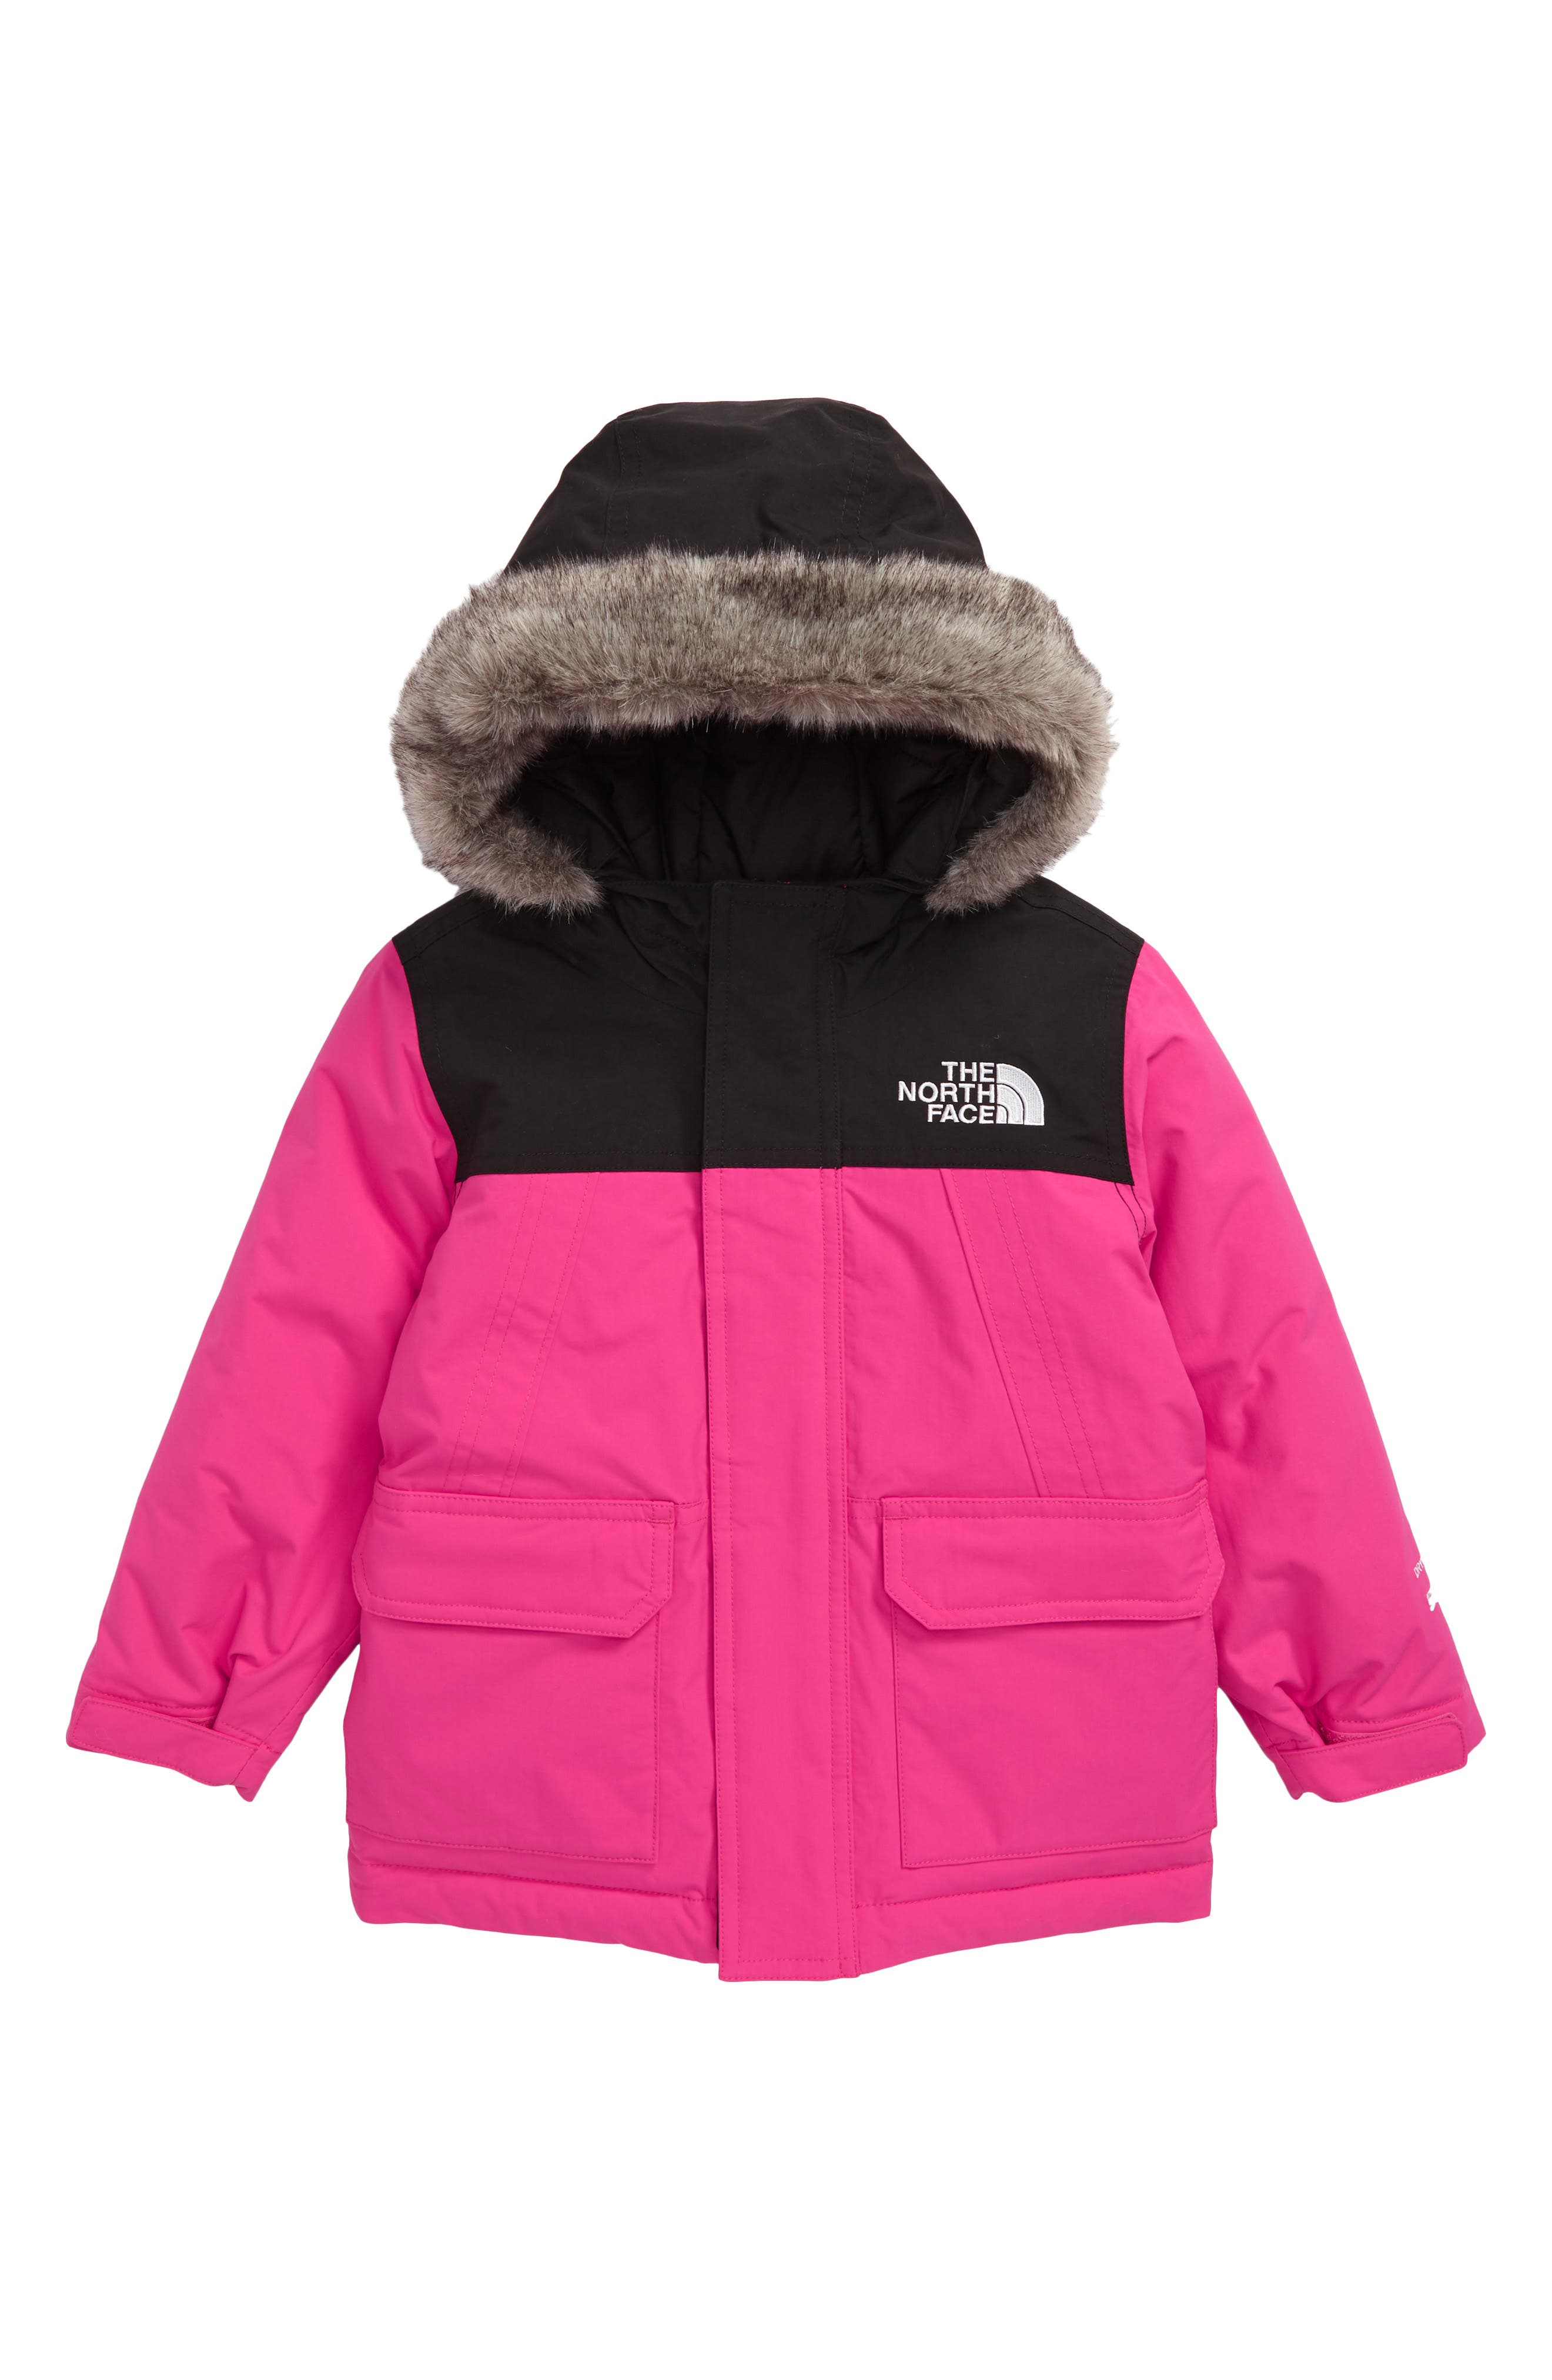 The North Face McMurdo Waterproof 550 